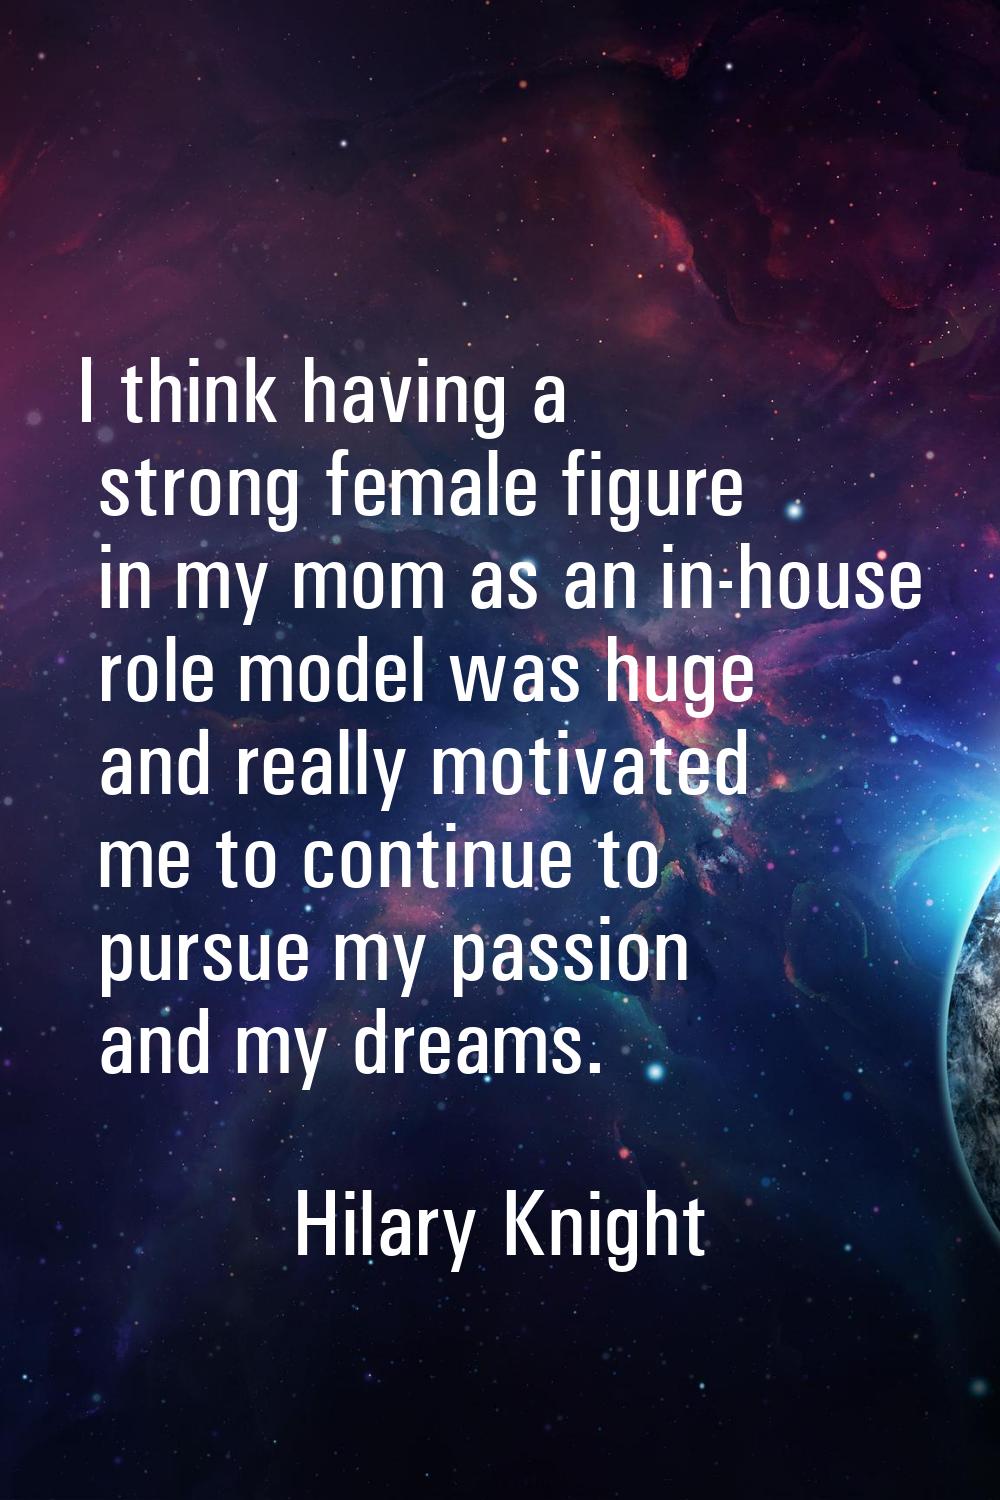 I think having a strong female figure in my mom as an in-house role model was huge and really motiv